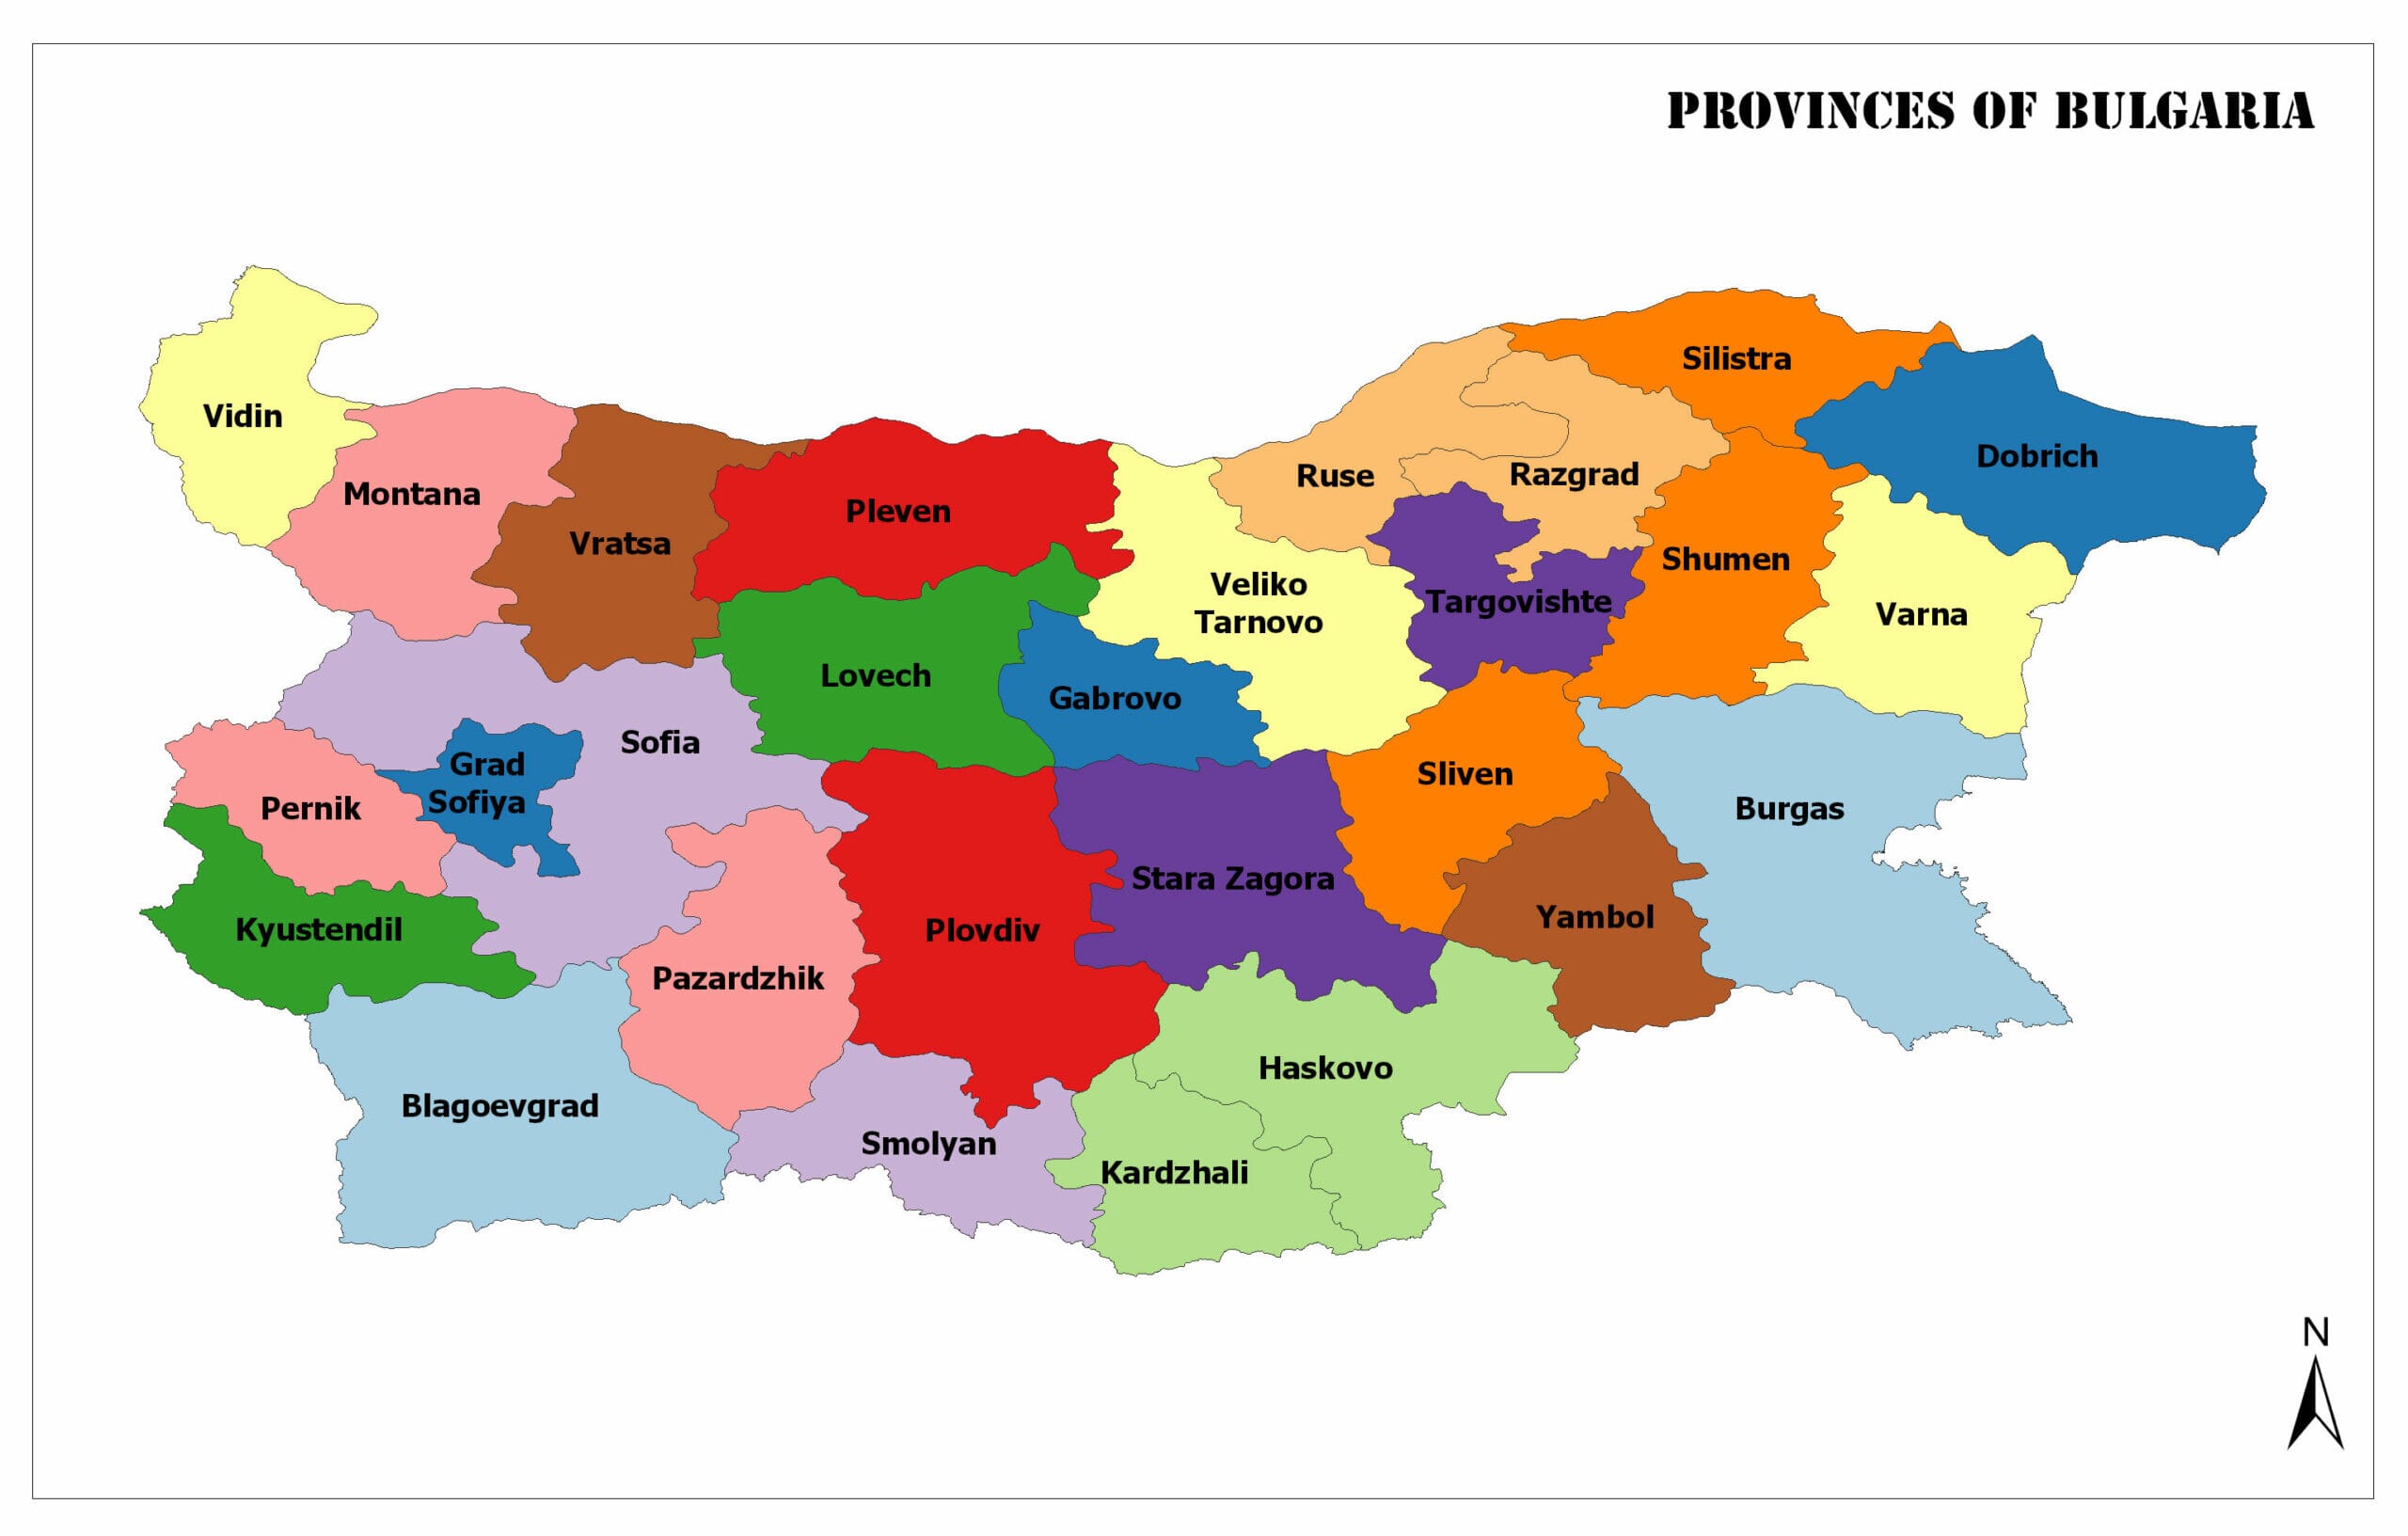 How many provinces are there in Bulgaria?